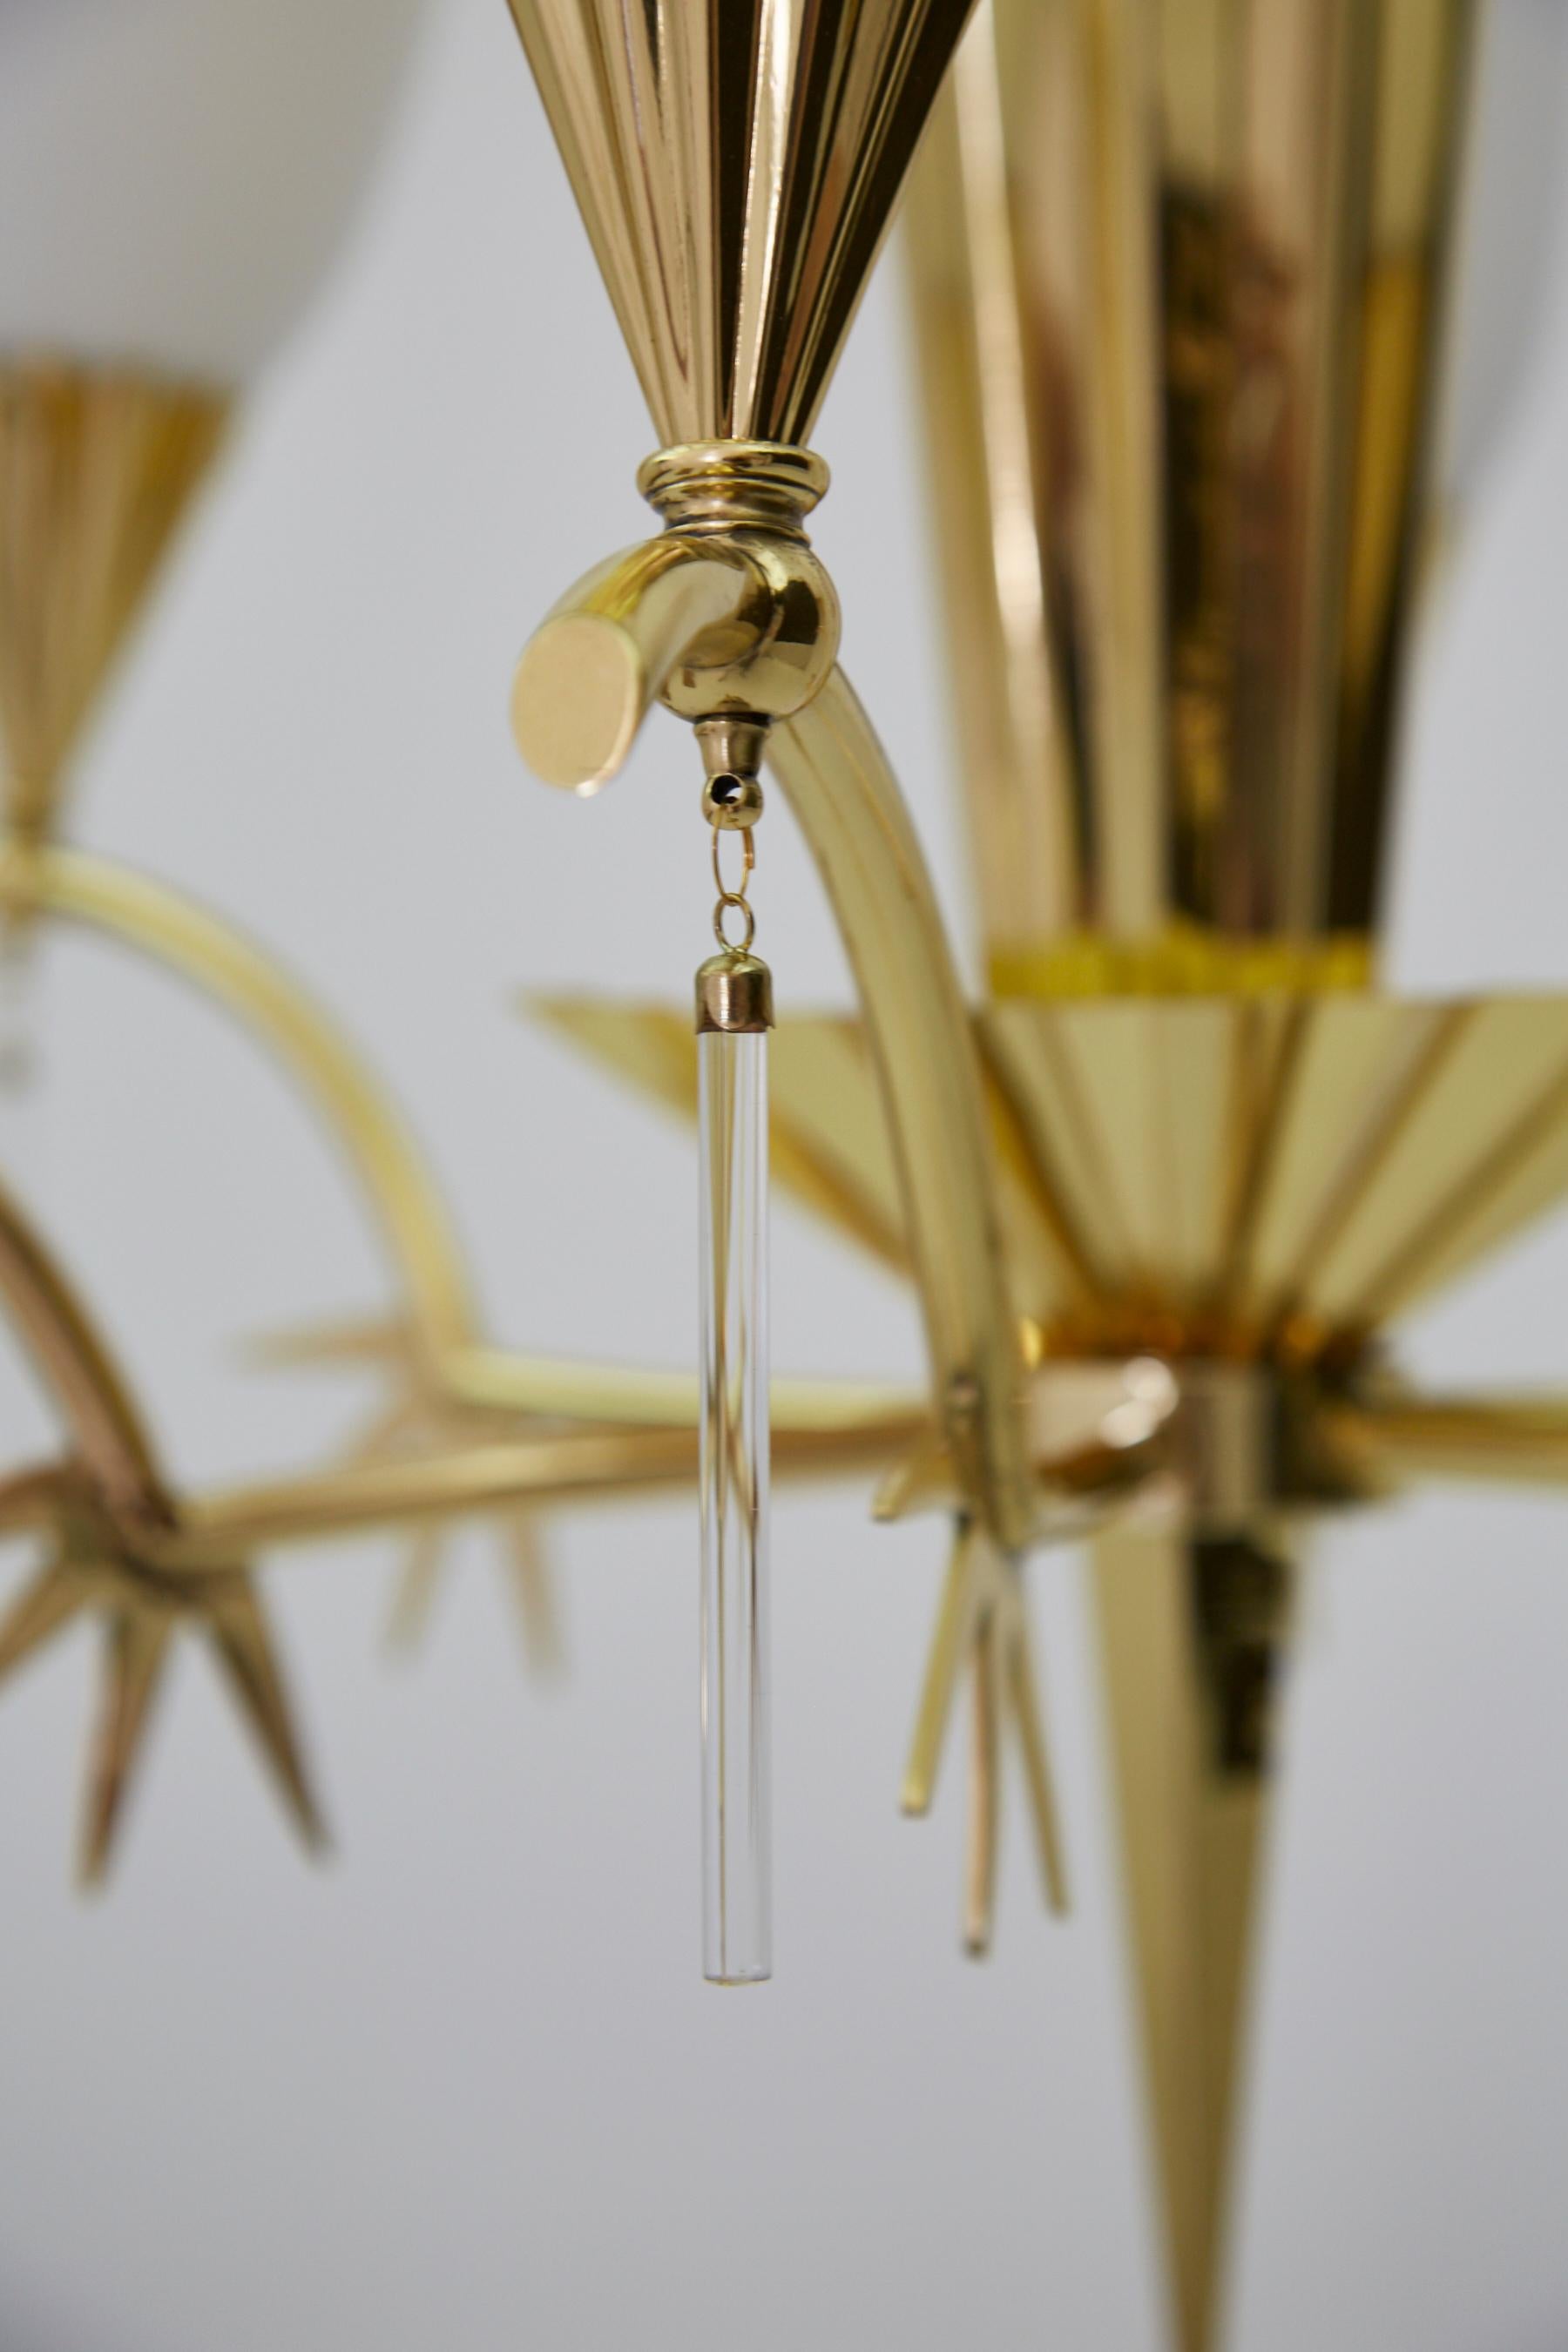 Six-Arm Italian Brass Chandelier with Decorative Spikes, 1940s For Sale 8